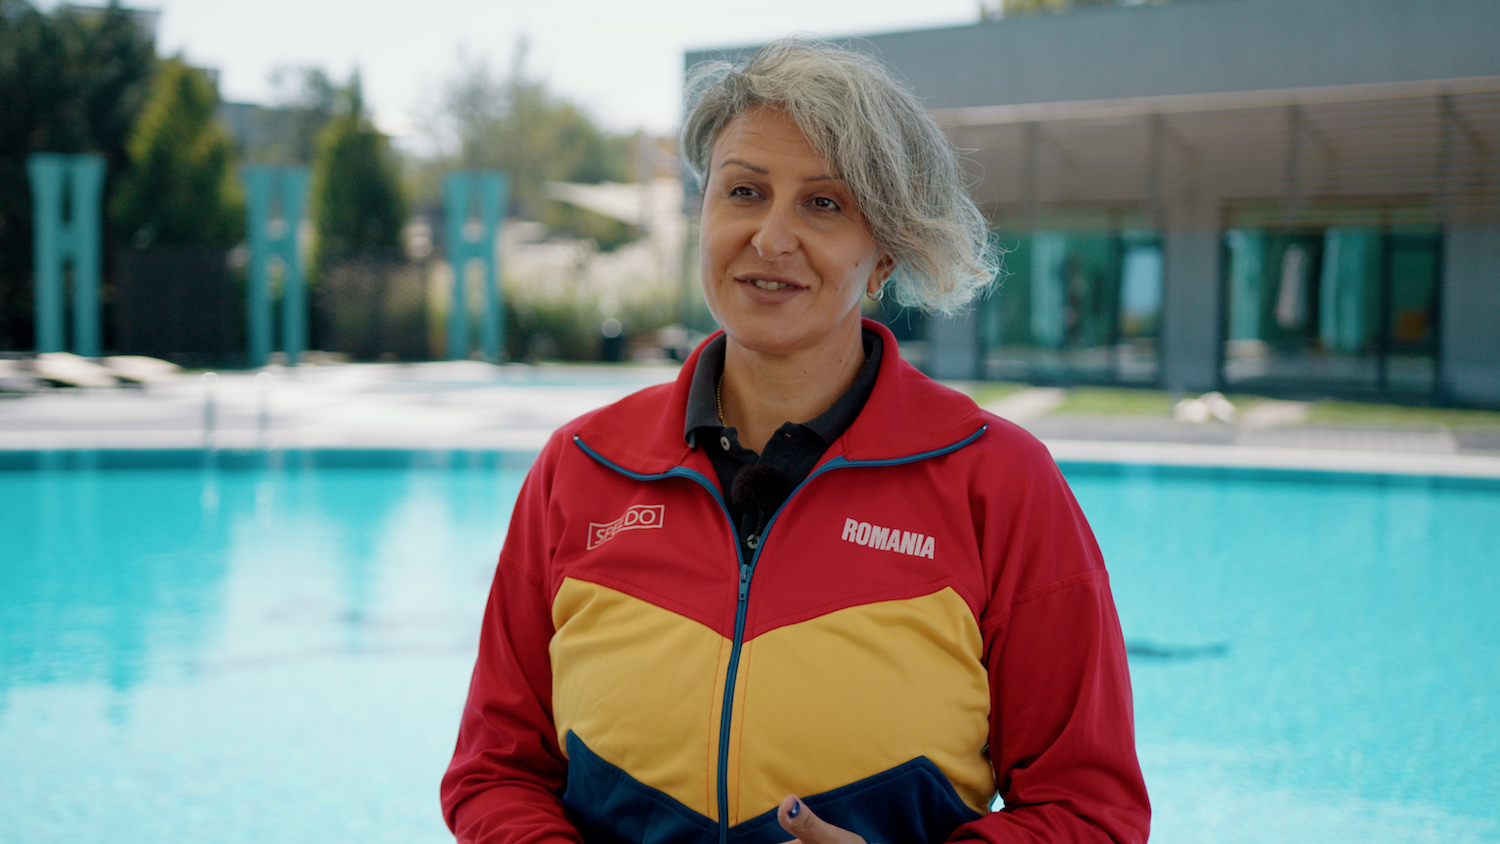 A gesture of hope! Beatrice Câșlaru, multiple swimming champion, donated her first European medal in the MedLife program for free genetic testing for children with cancer